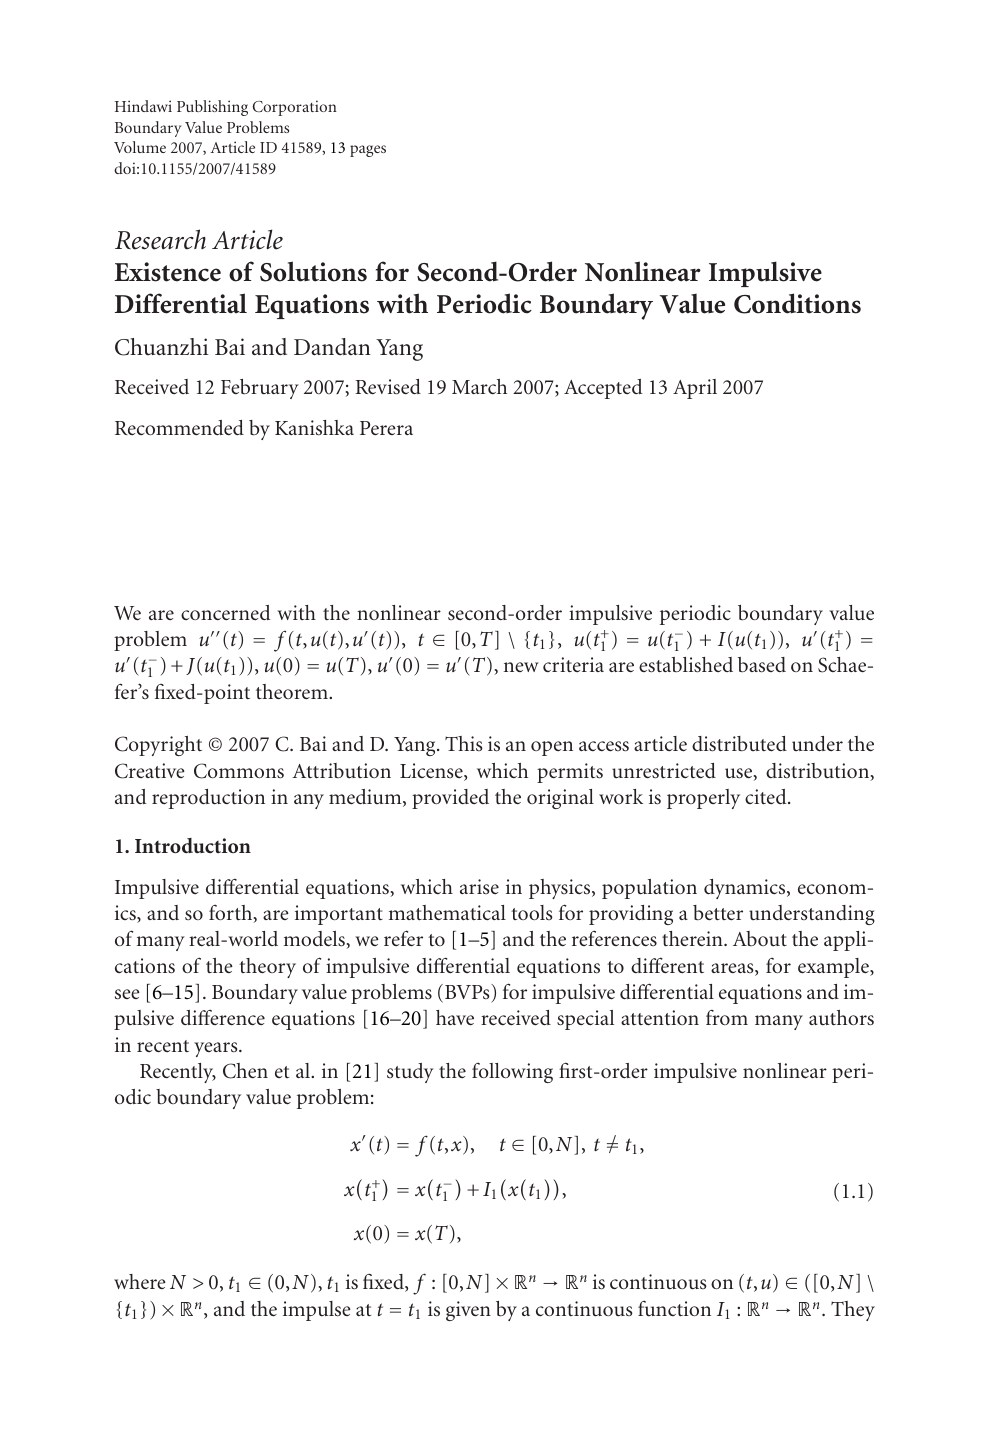 Existence Of Solutions For Second Order Nonlinear Impulsive Differential Equations With Periodic Boundary Value Conditions Topic Of Research Paper In Mathematics Download Scholarly Article Pdf And Read For Free On Cyberleninka Open